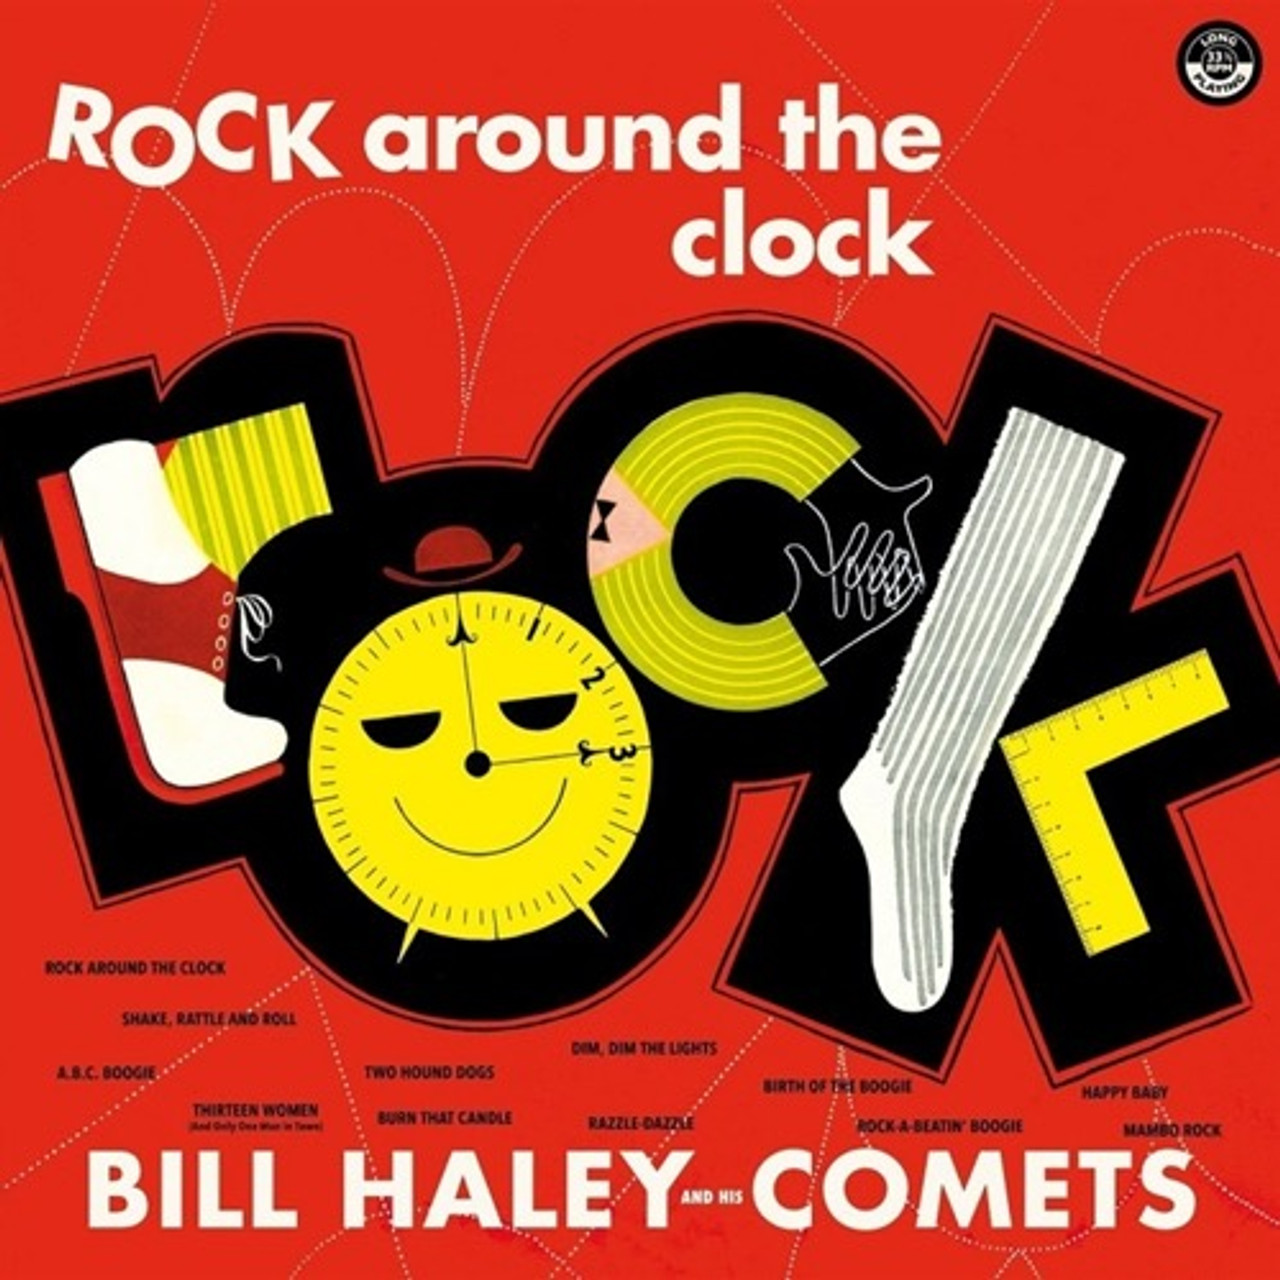 Bill Haley and His Comets - Rock Around the Clock (180g Import Vinyl LP) -  Music Direct